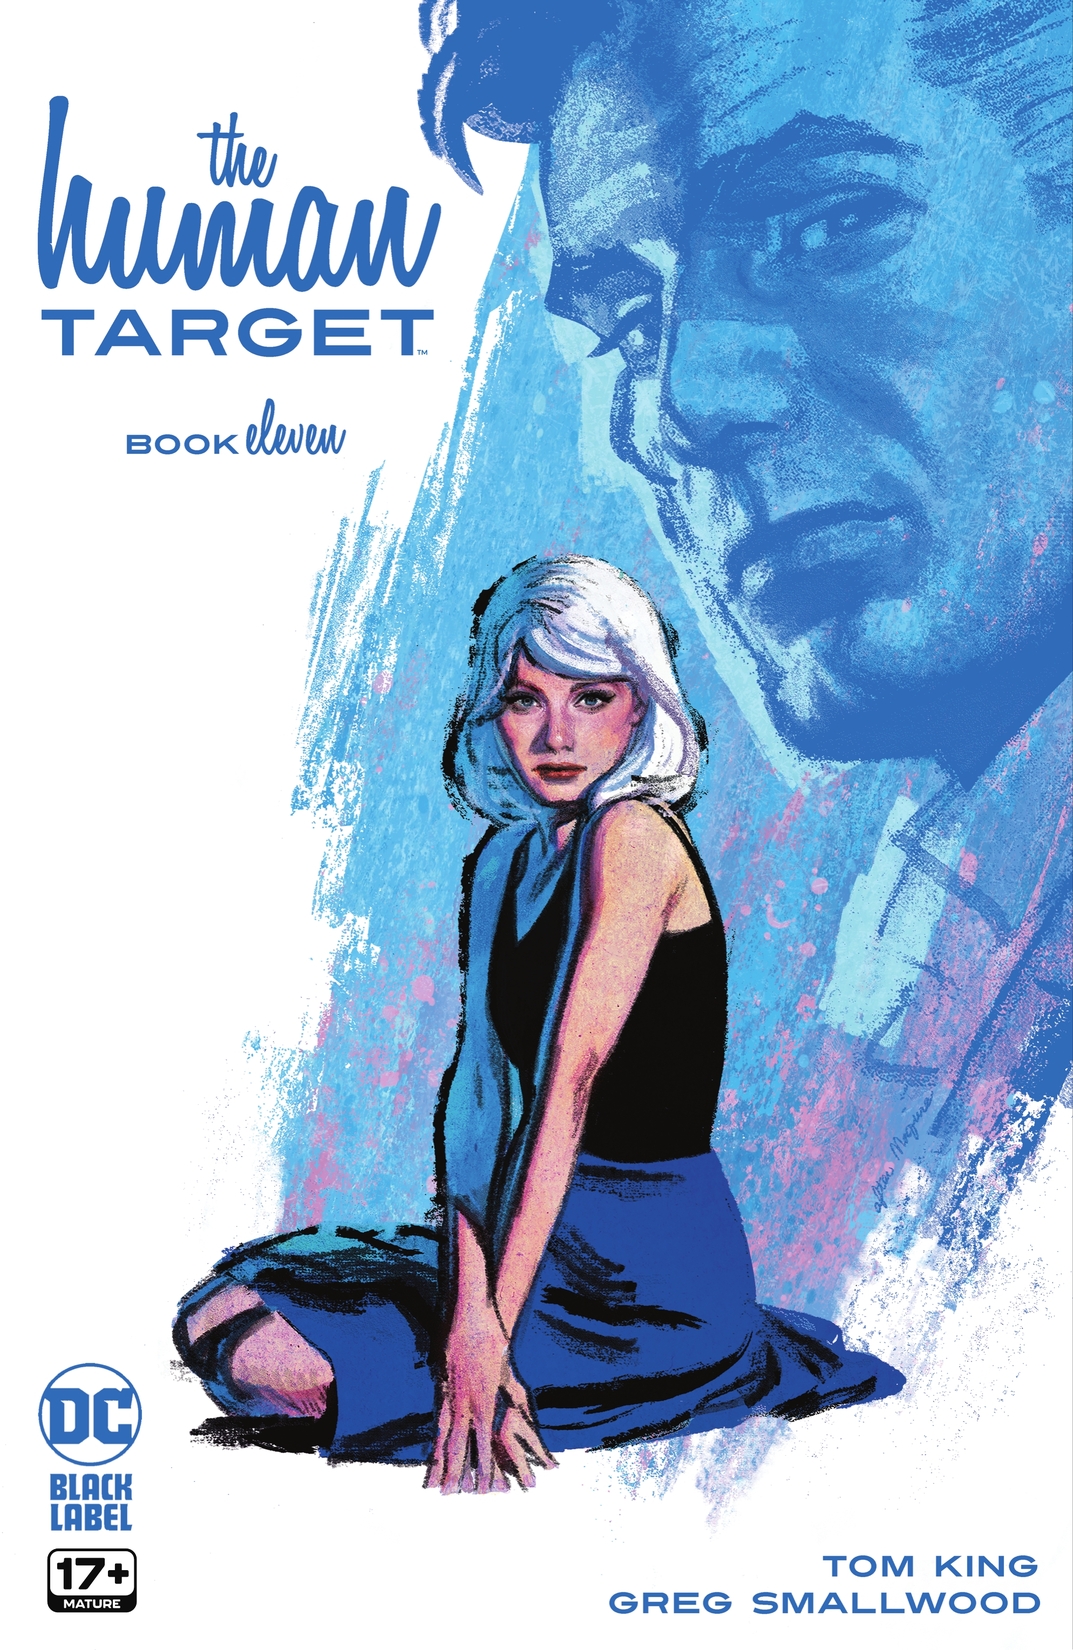 The Human Target #11 preview images